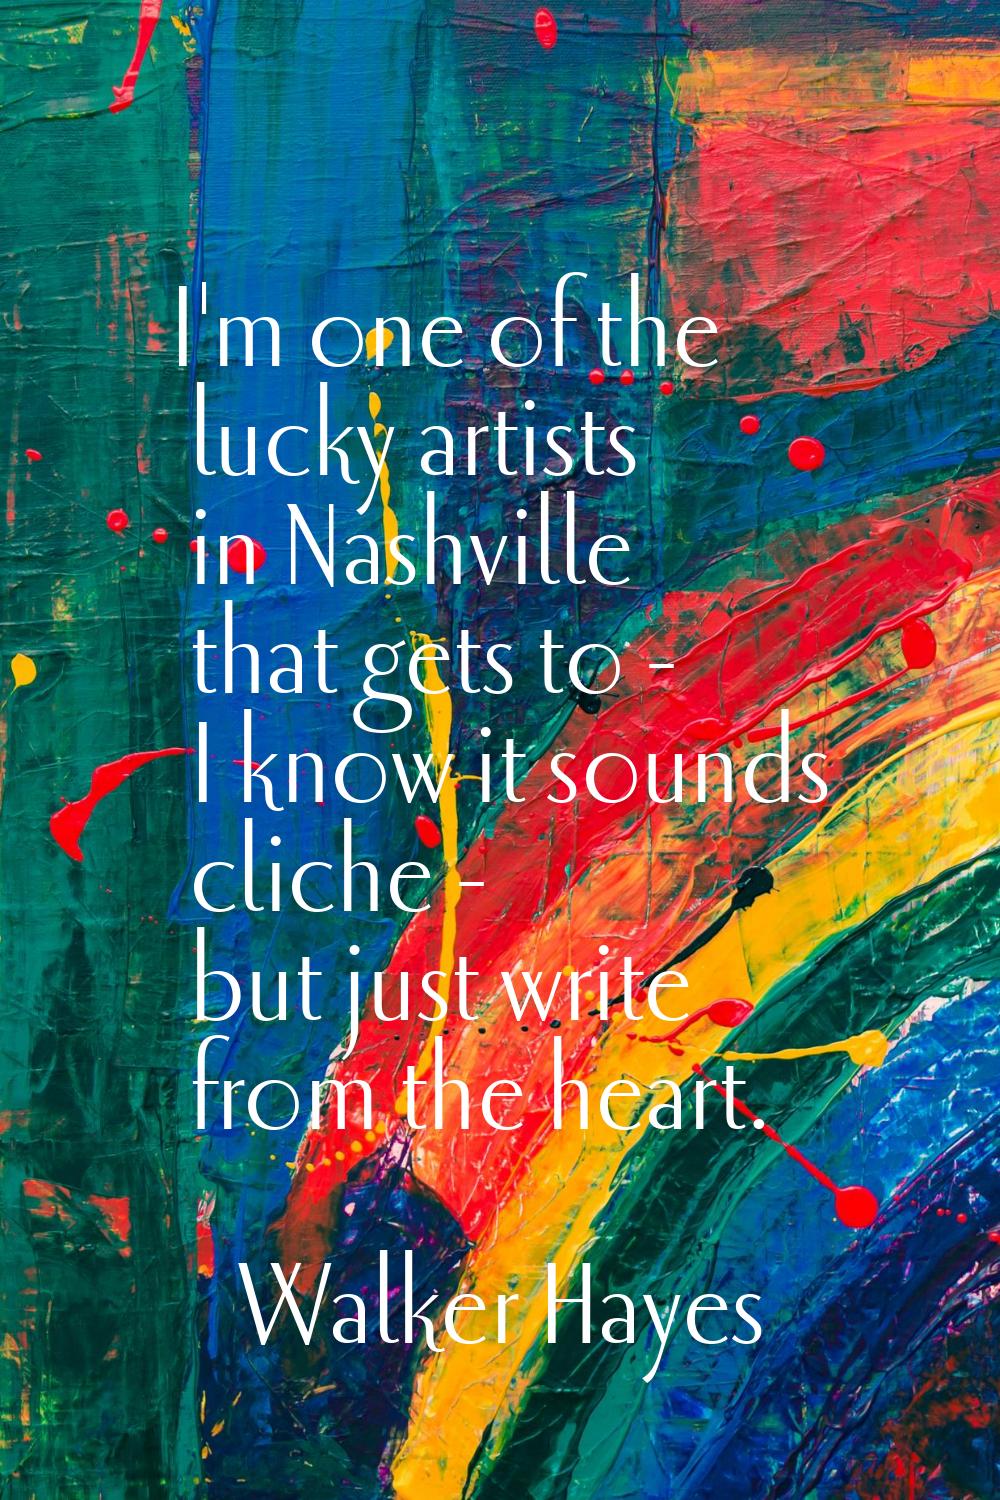 I'm one of the lucky artists in Nashville that gets to - I know it sounds cliche - but just write f